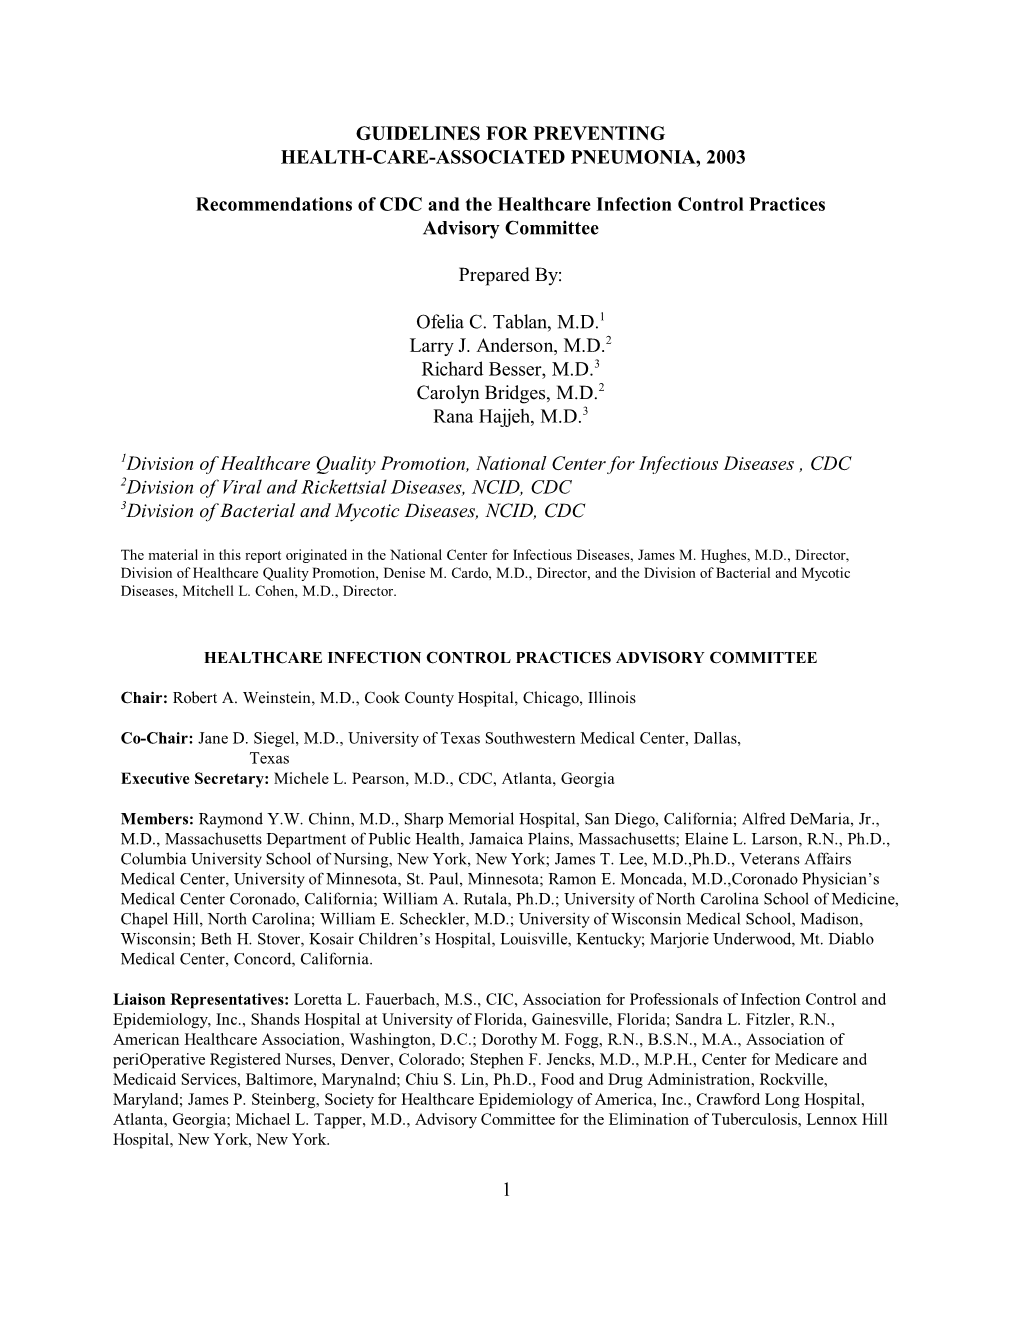 1 GUIDELINES for PREVENTING HEALTH-CARE-ASSOCIATED PNEUMONIA, 2003 Recommendations of CDC and the Healthcare Infection Control P